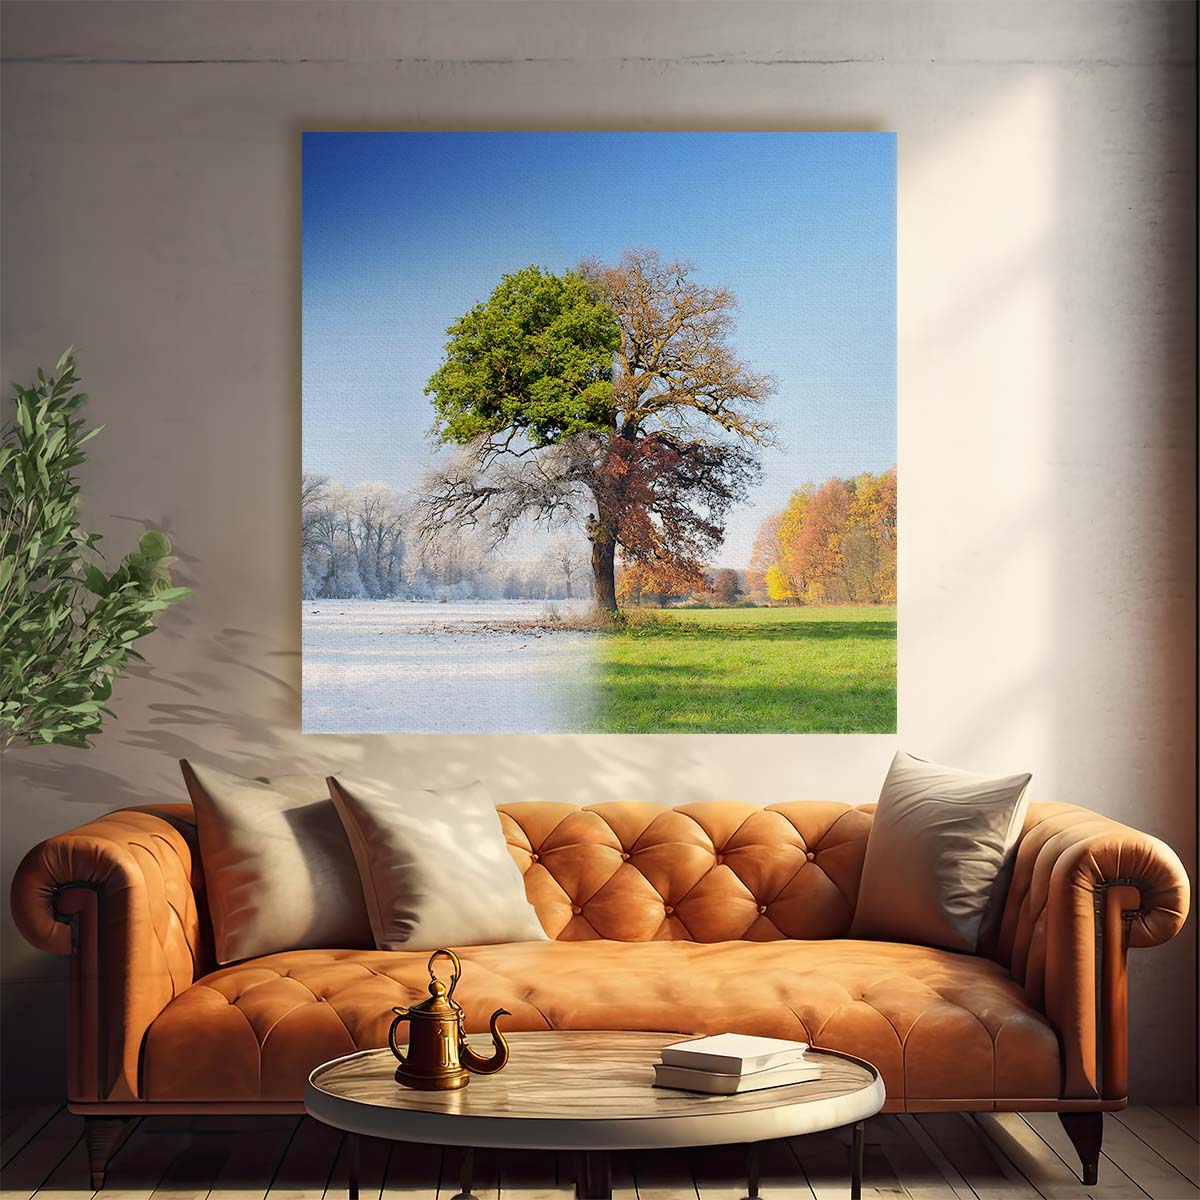 Fantasy Four Seasons Surreal Landscape Photography Wall Art by Luxuriance Designs. Made in USA.